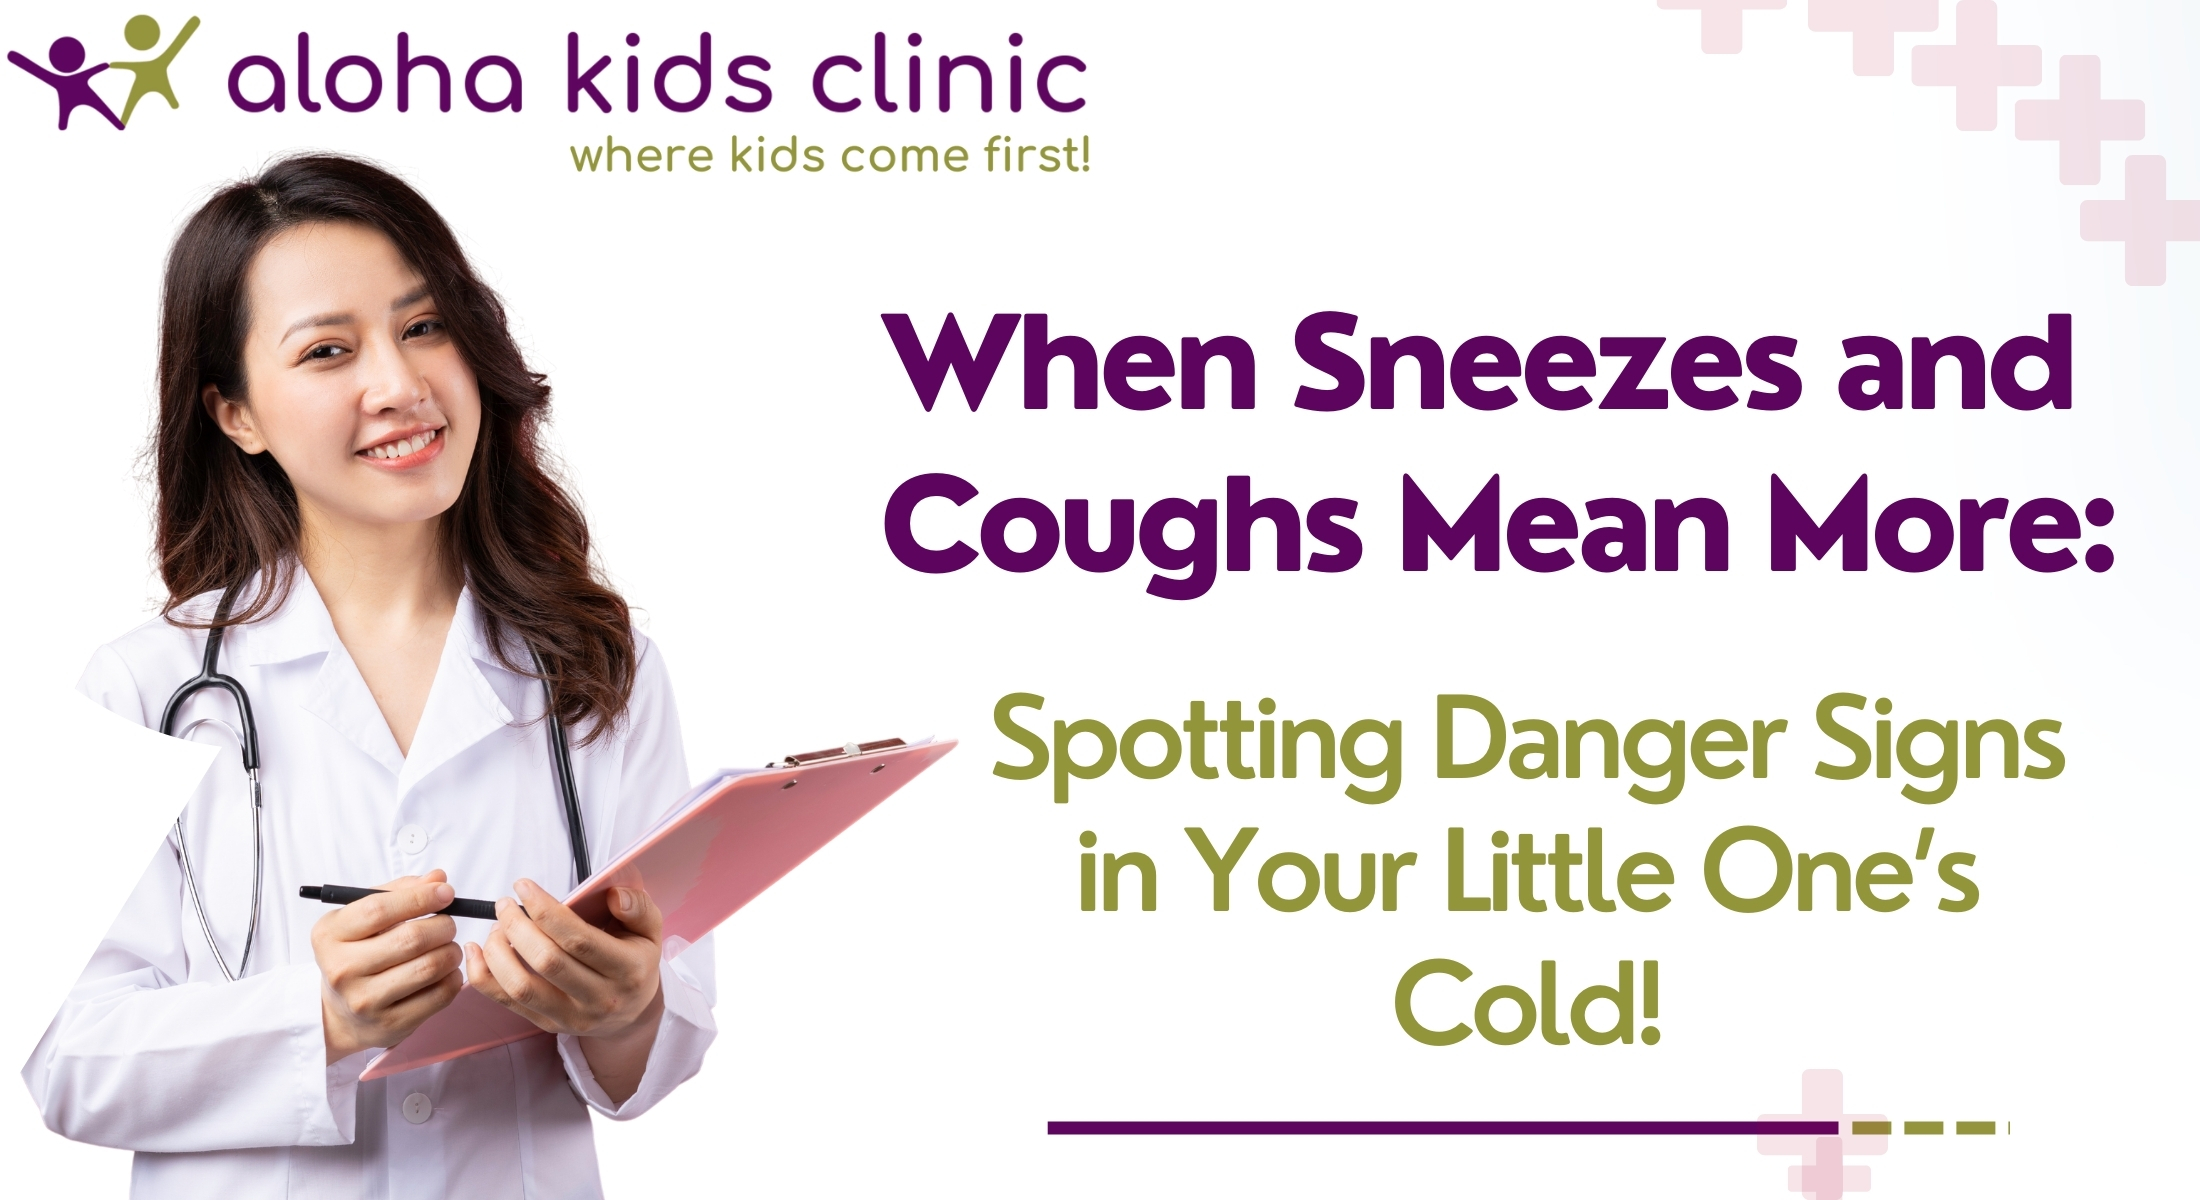 When Sneezes and Coughs Mean More: Spotting Danger Signs in Your Little One’s Cold